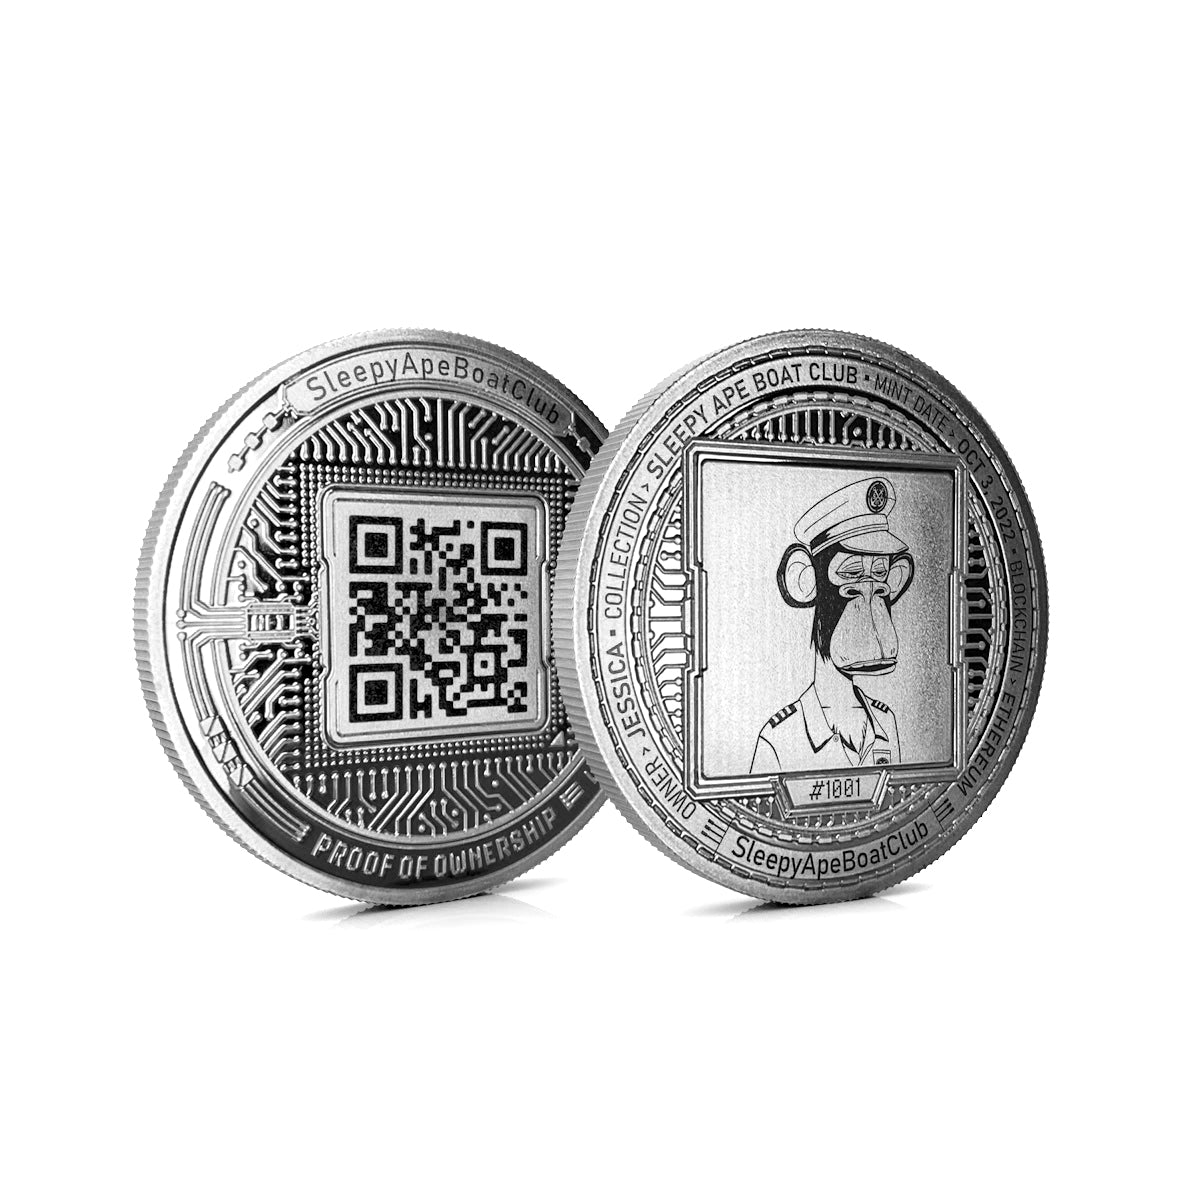 Cryptochips | NFT Coins Physical Crypto Coin. Collectable cryptocurrency merch you can hodl